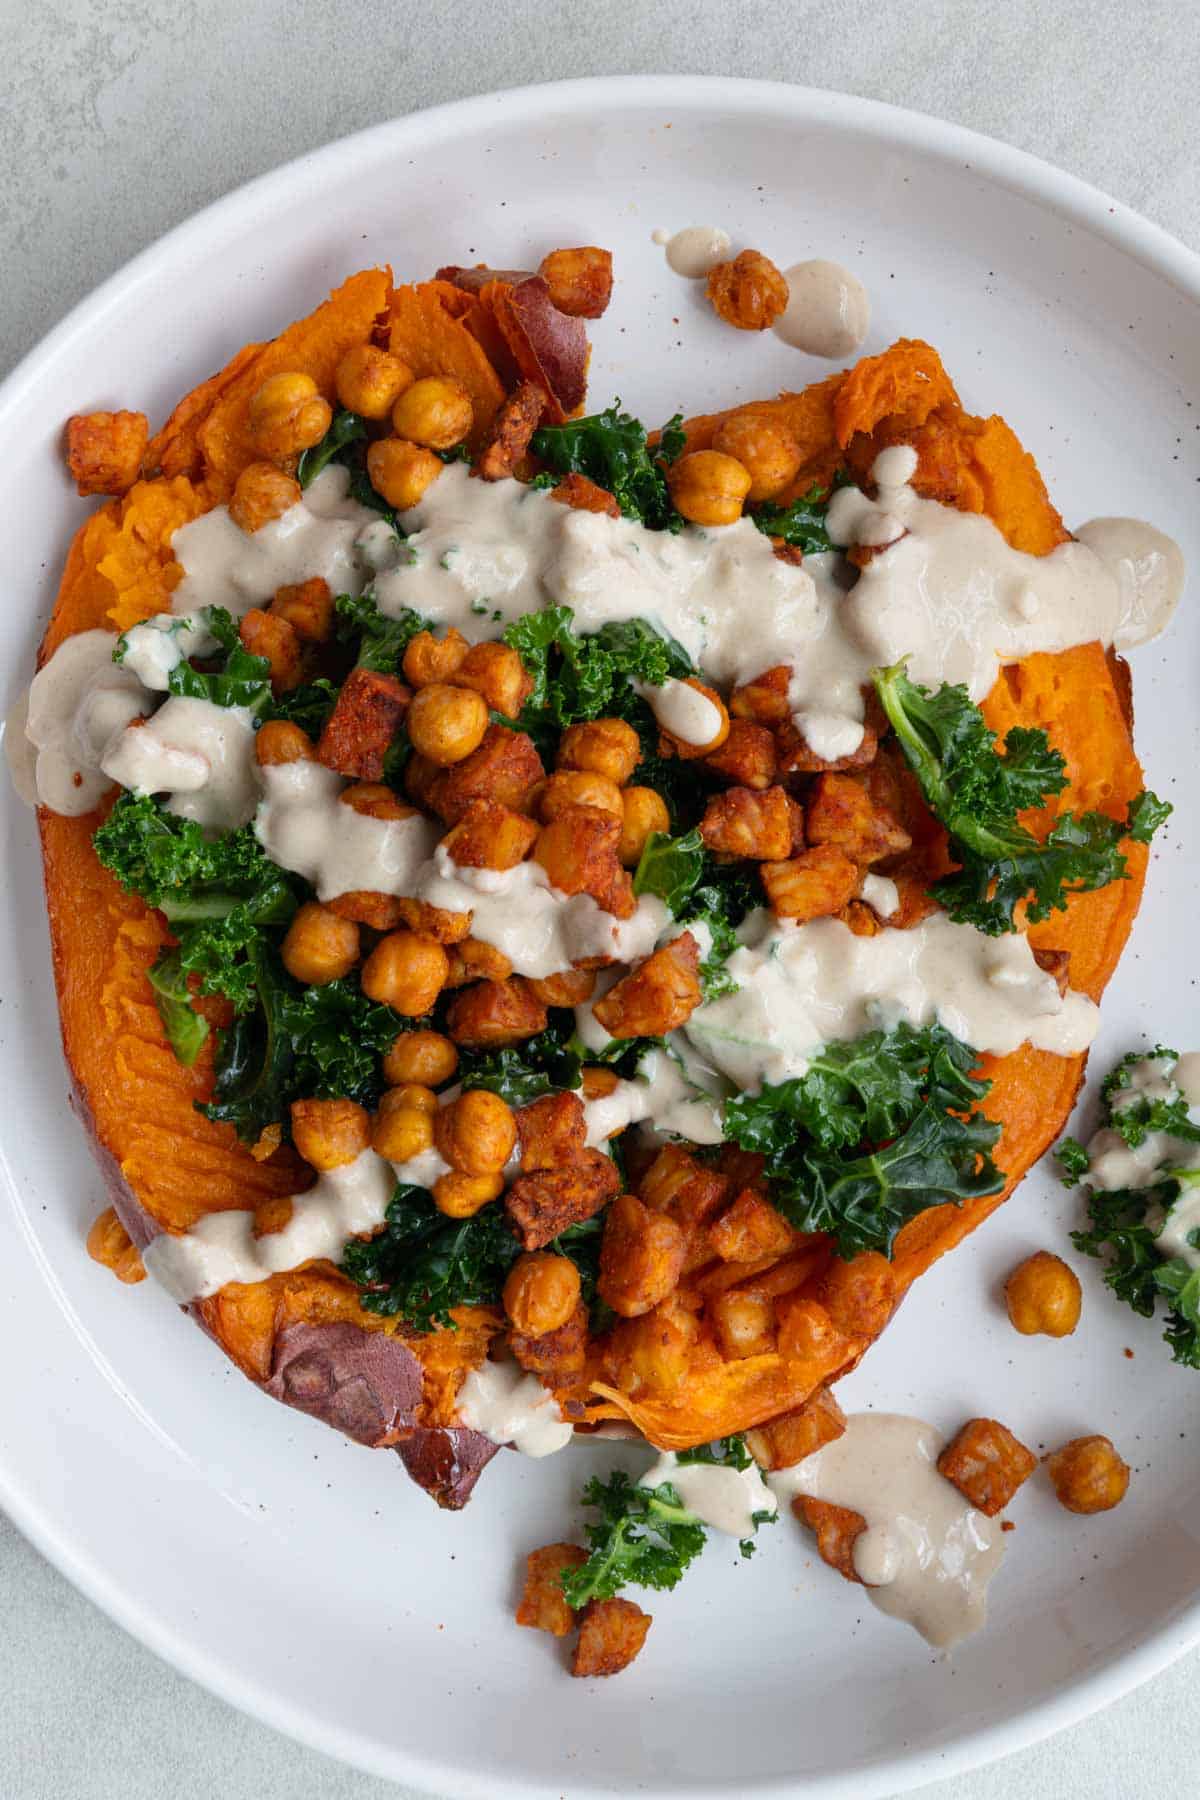 Loaded sweet potato with air fryer crispy tempeh and chickpeas, on a bed of massaged kale, with creamy tahini dressing in a white bowl.